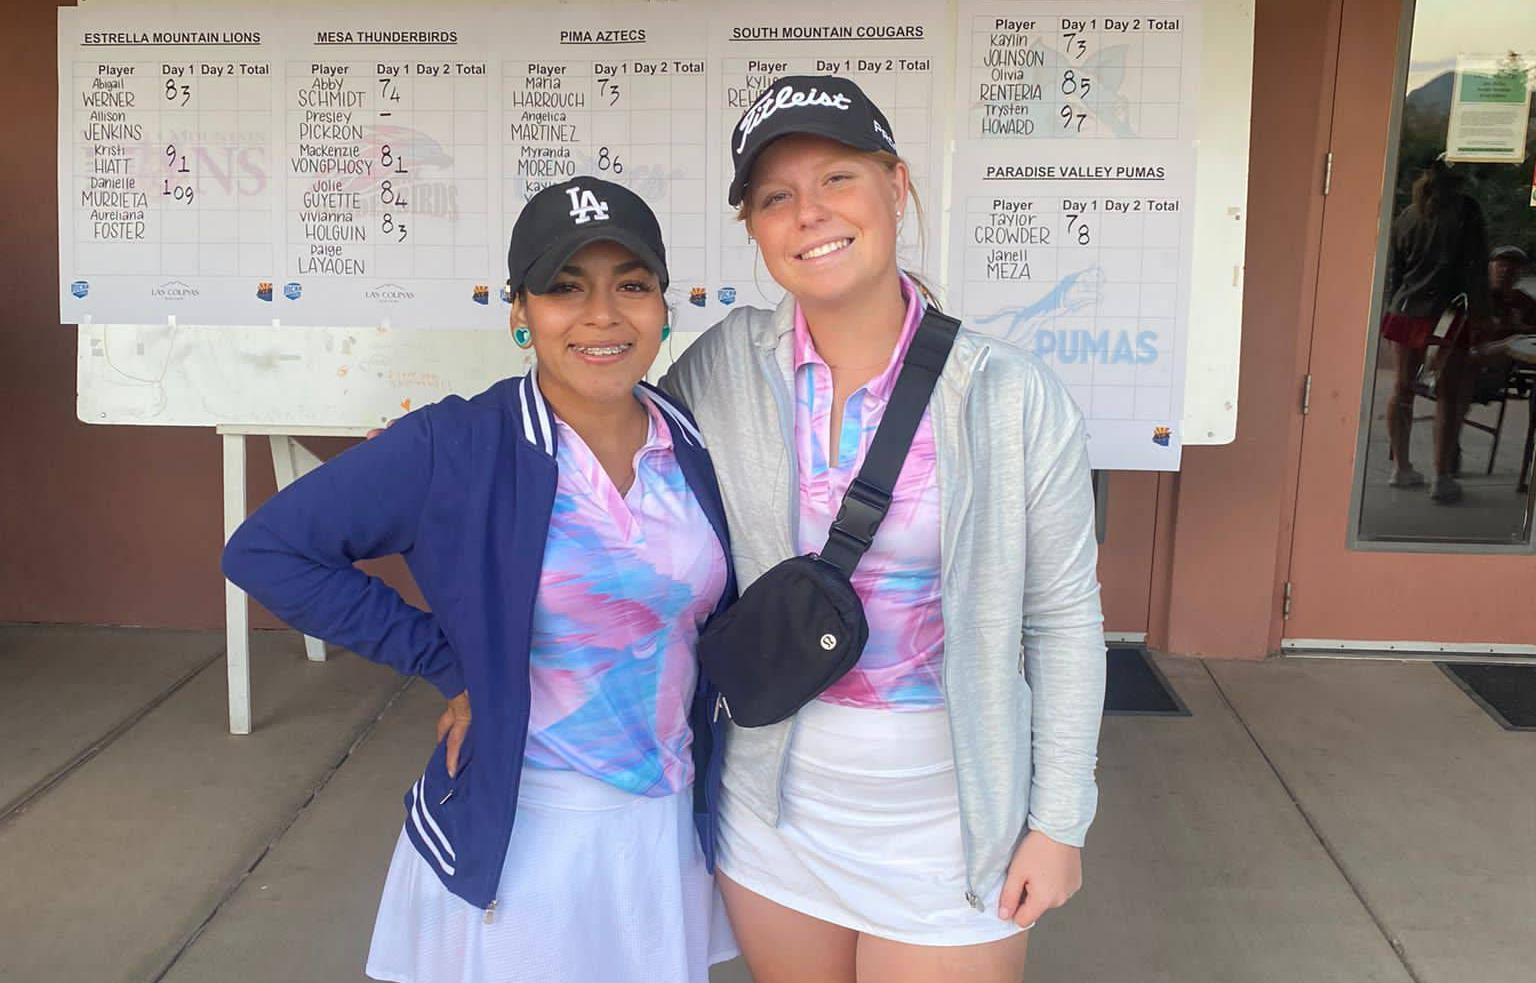 PERSONAL BEST ROUNDS FOR PUMAS, CROWDER FINISHED IN TOP TEN